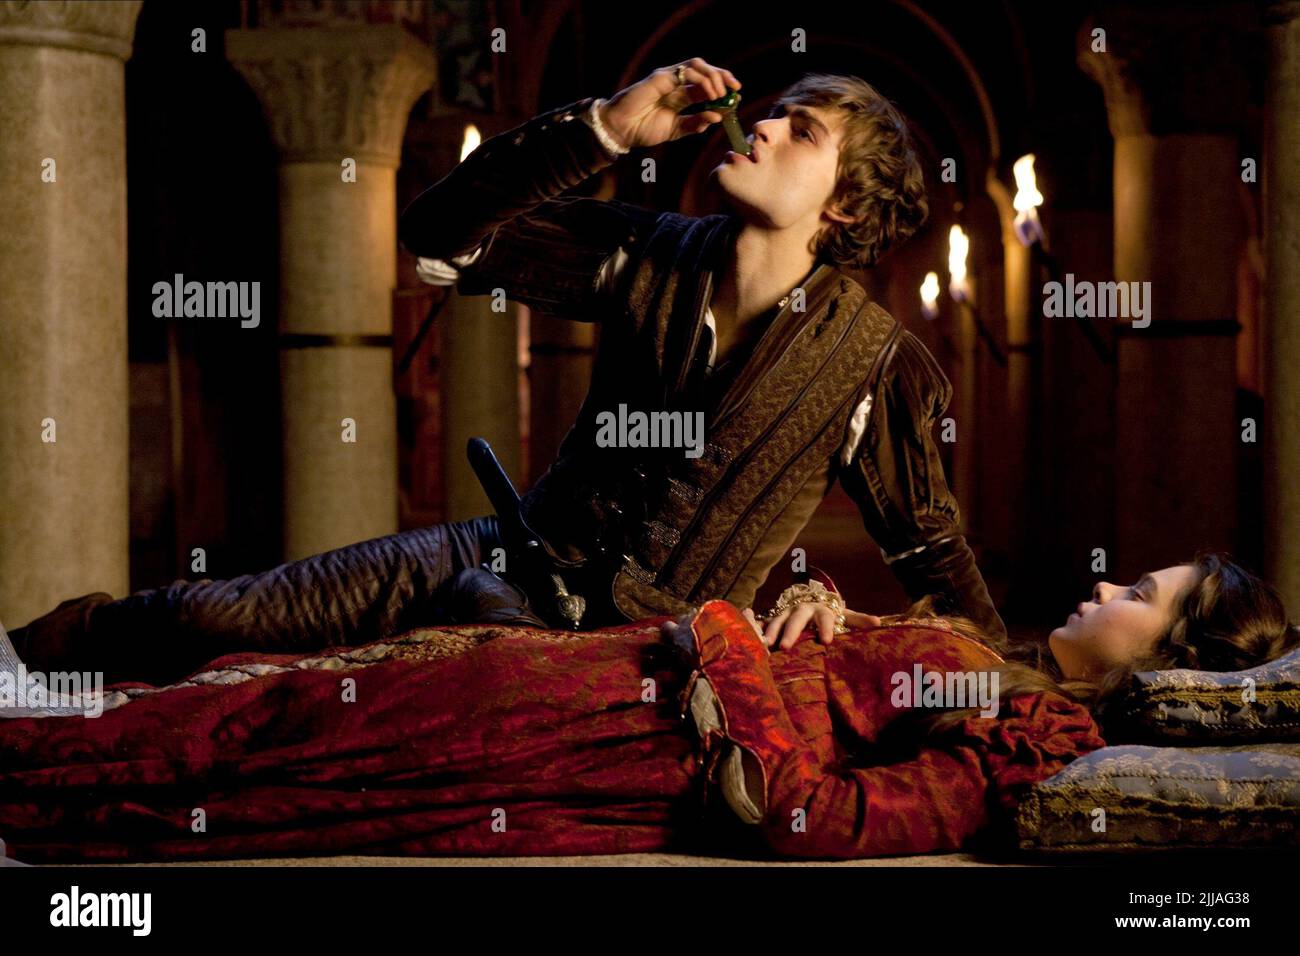 BOOTH,STEINFELD, ROMEO AND JULIET, 2013 Stock Photo